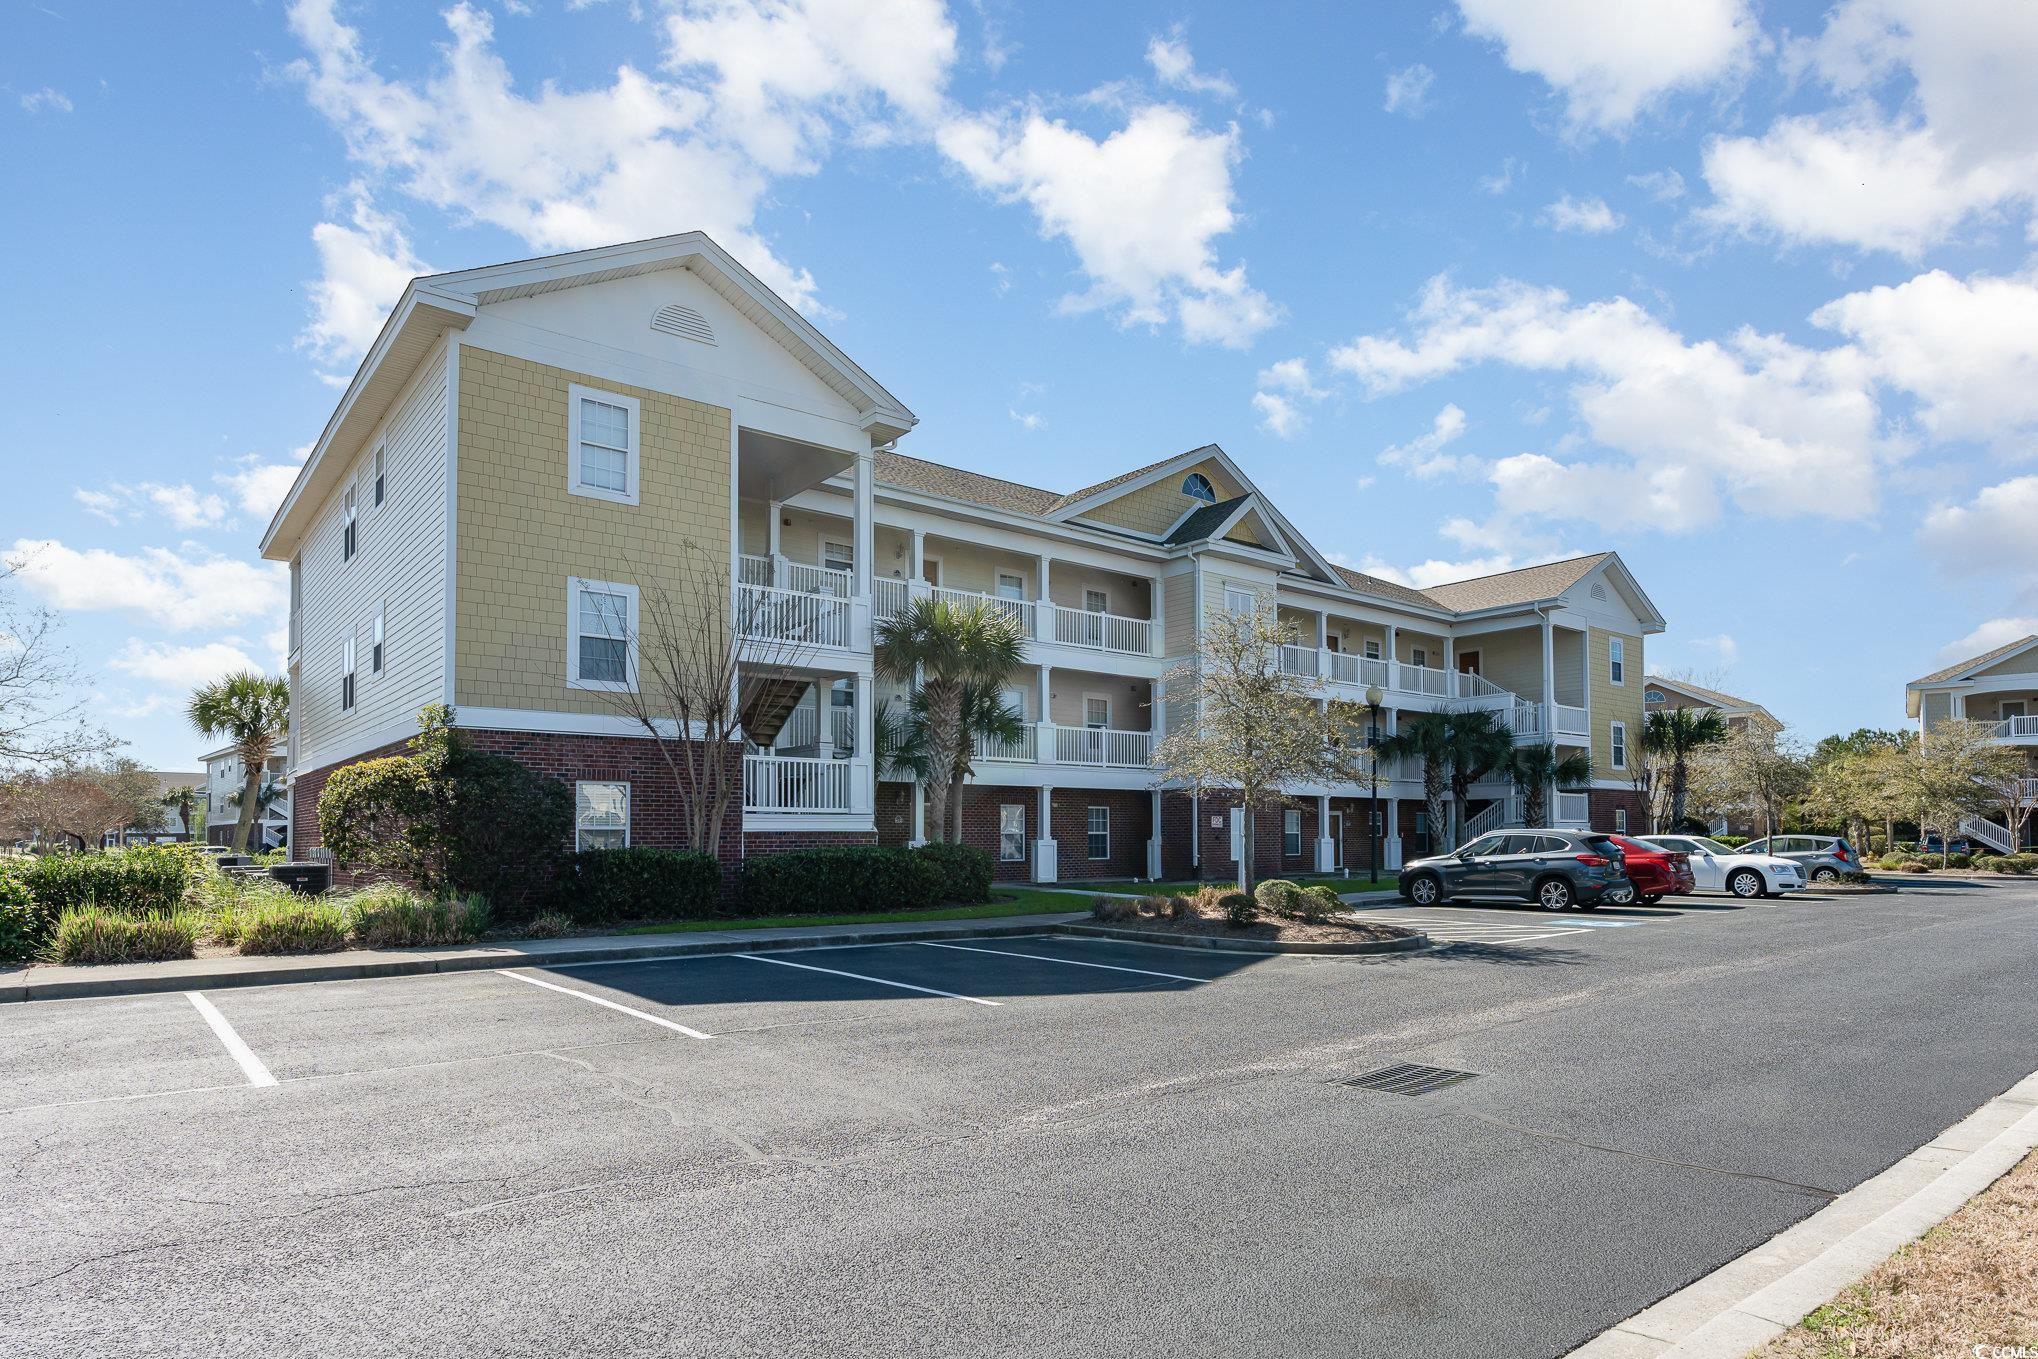 Photo one of 6203 Catalina Dr. # 413 North Myrtle Beach SC 29582 | MLS 2406326